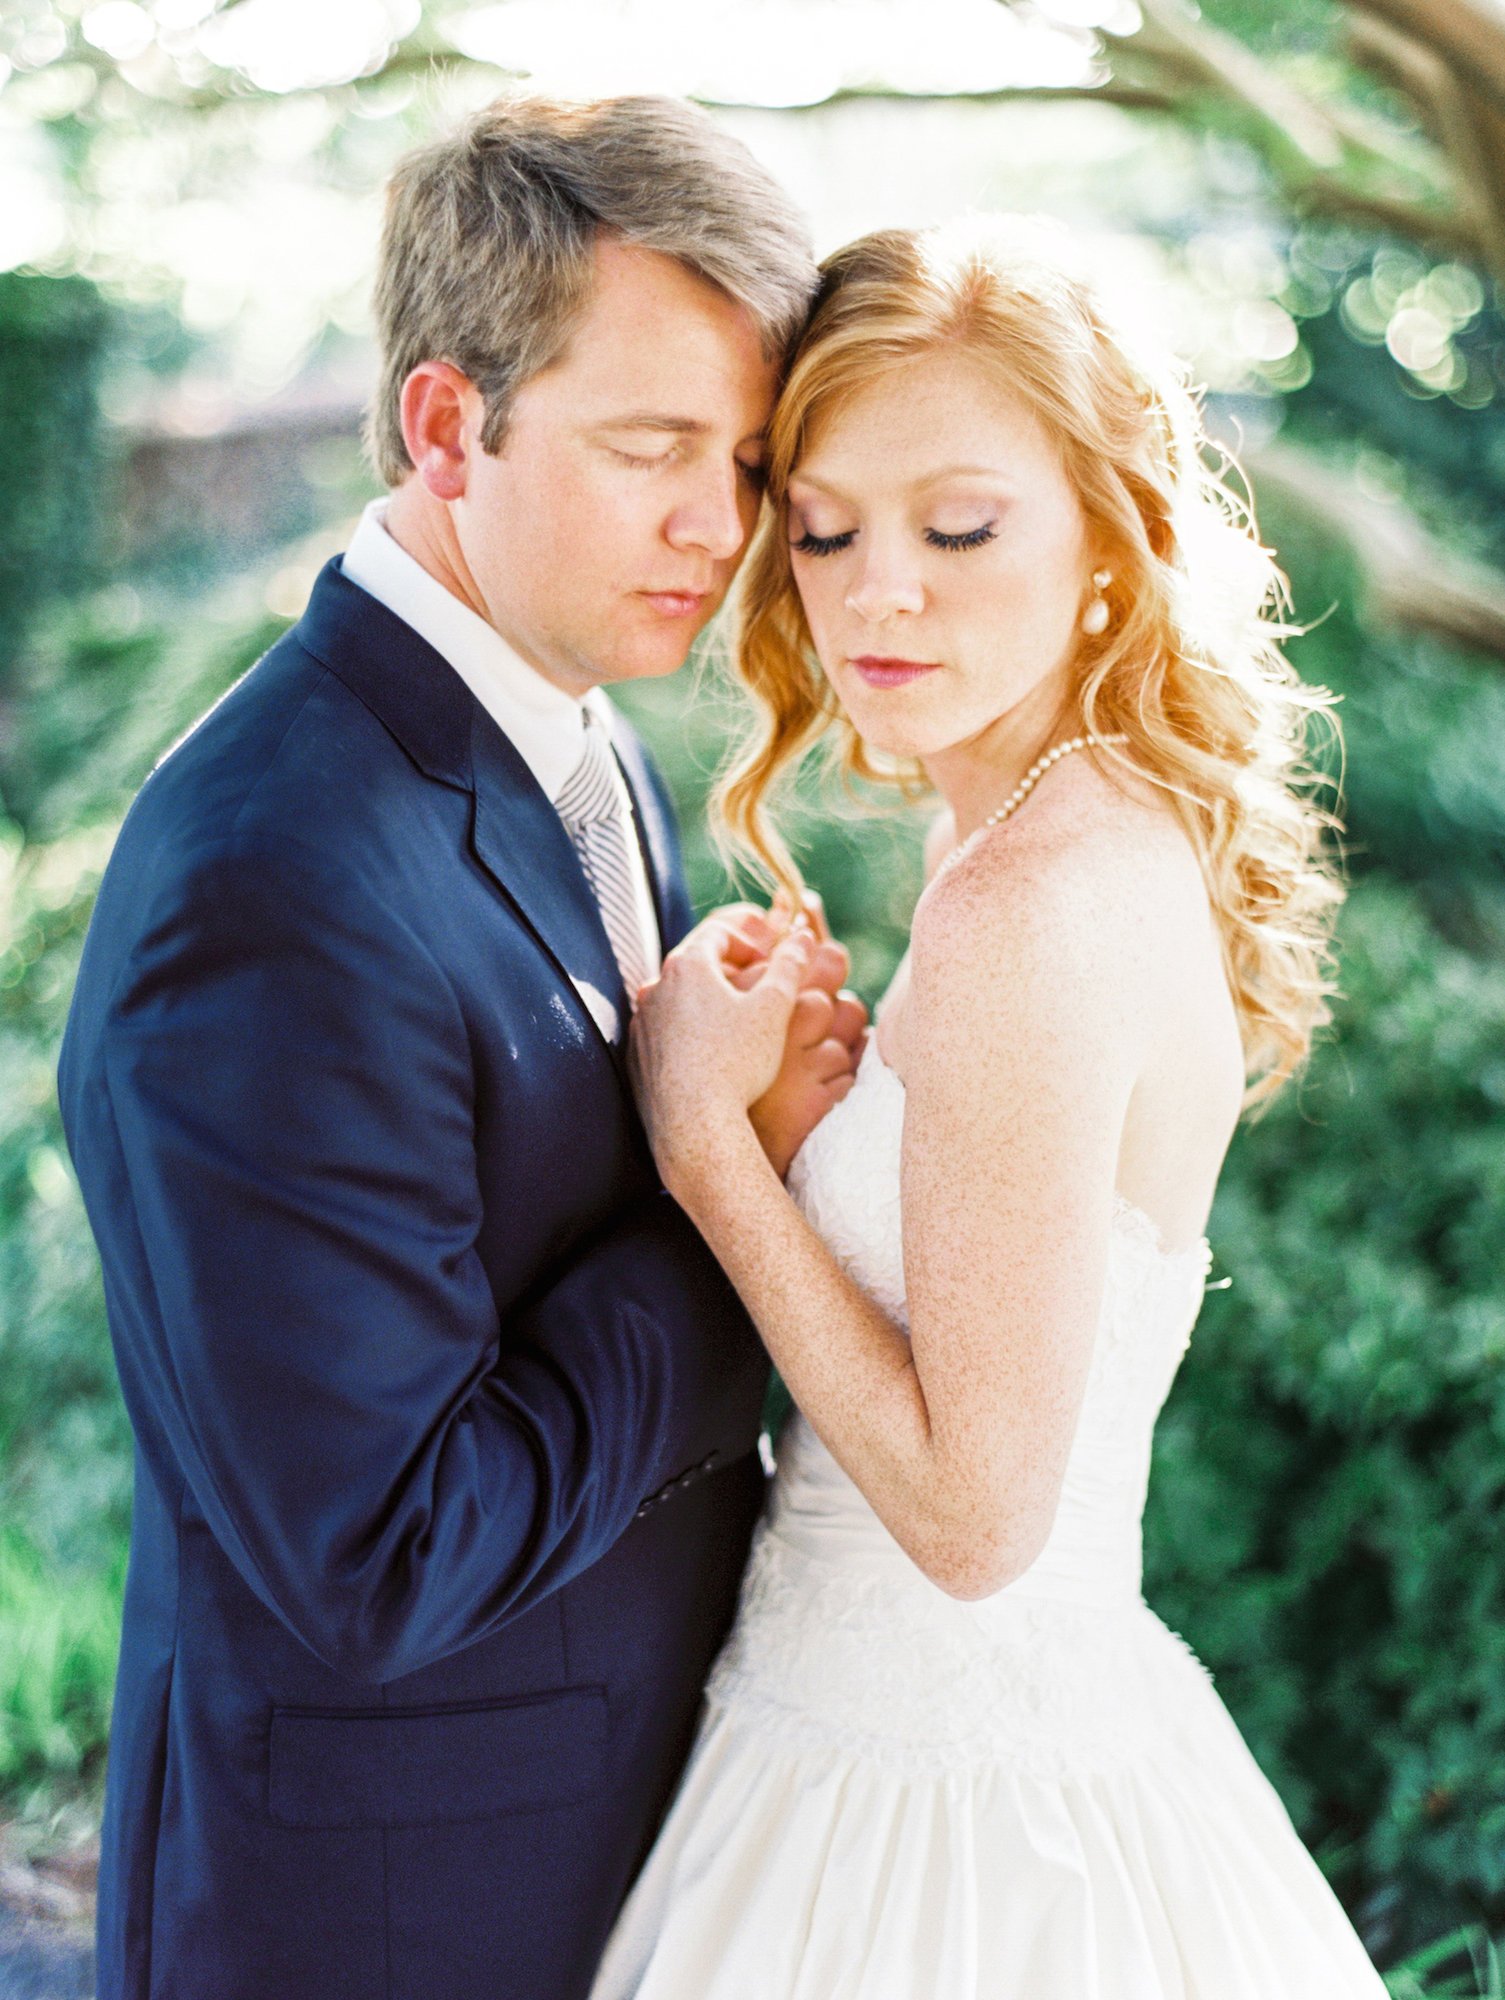 Best Wedding Photos Poses Every Couple Should Know